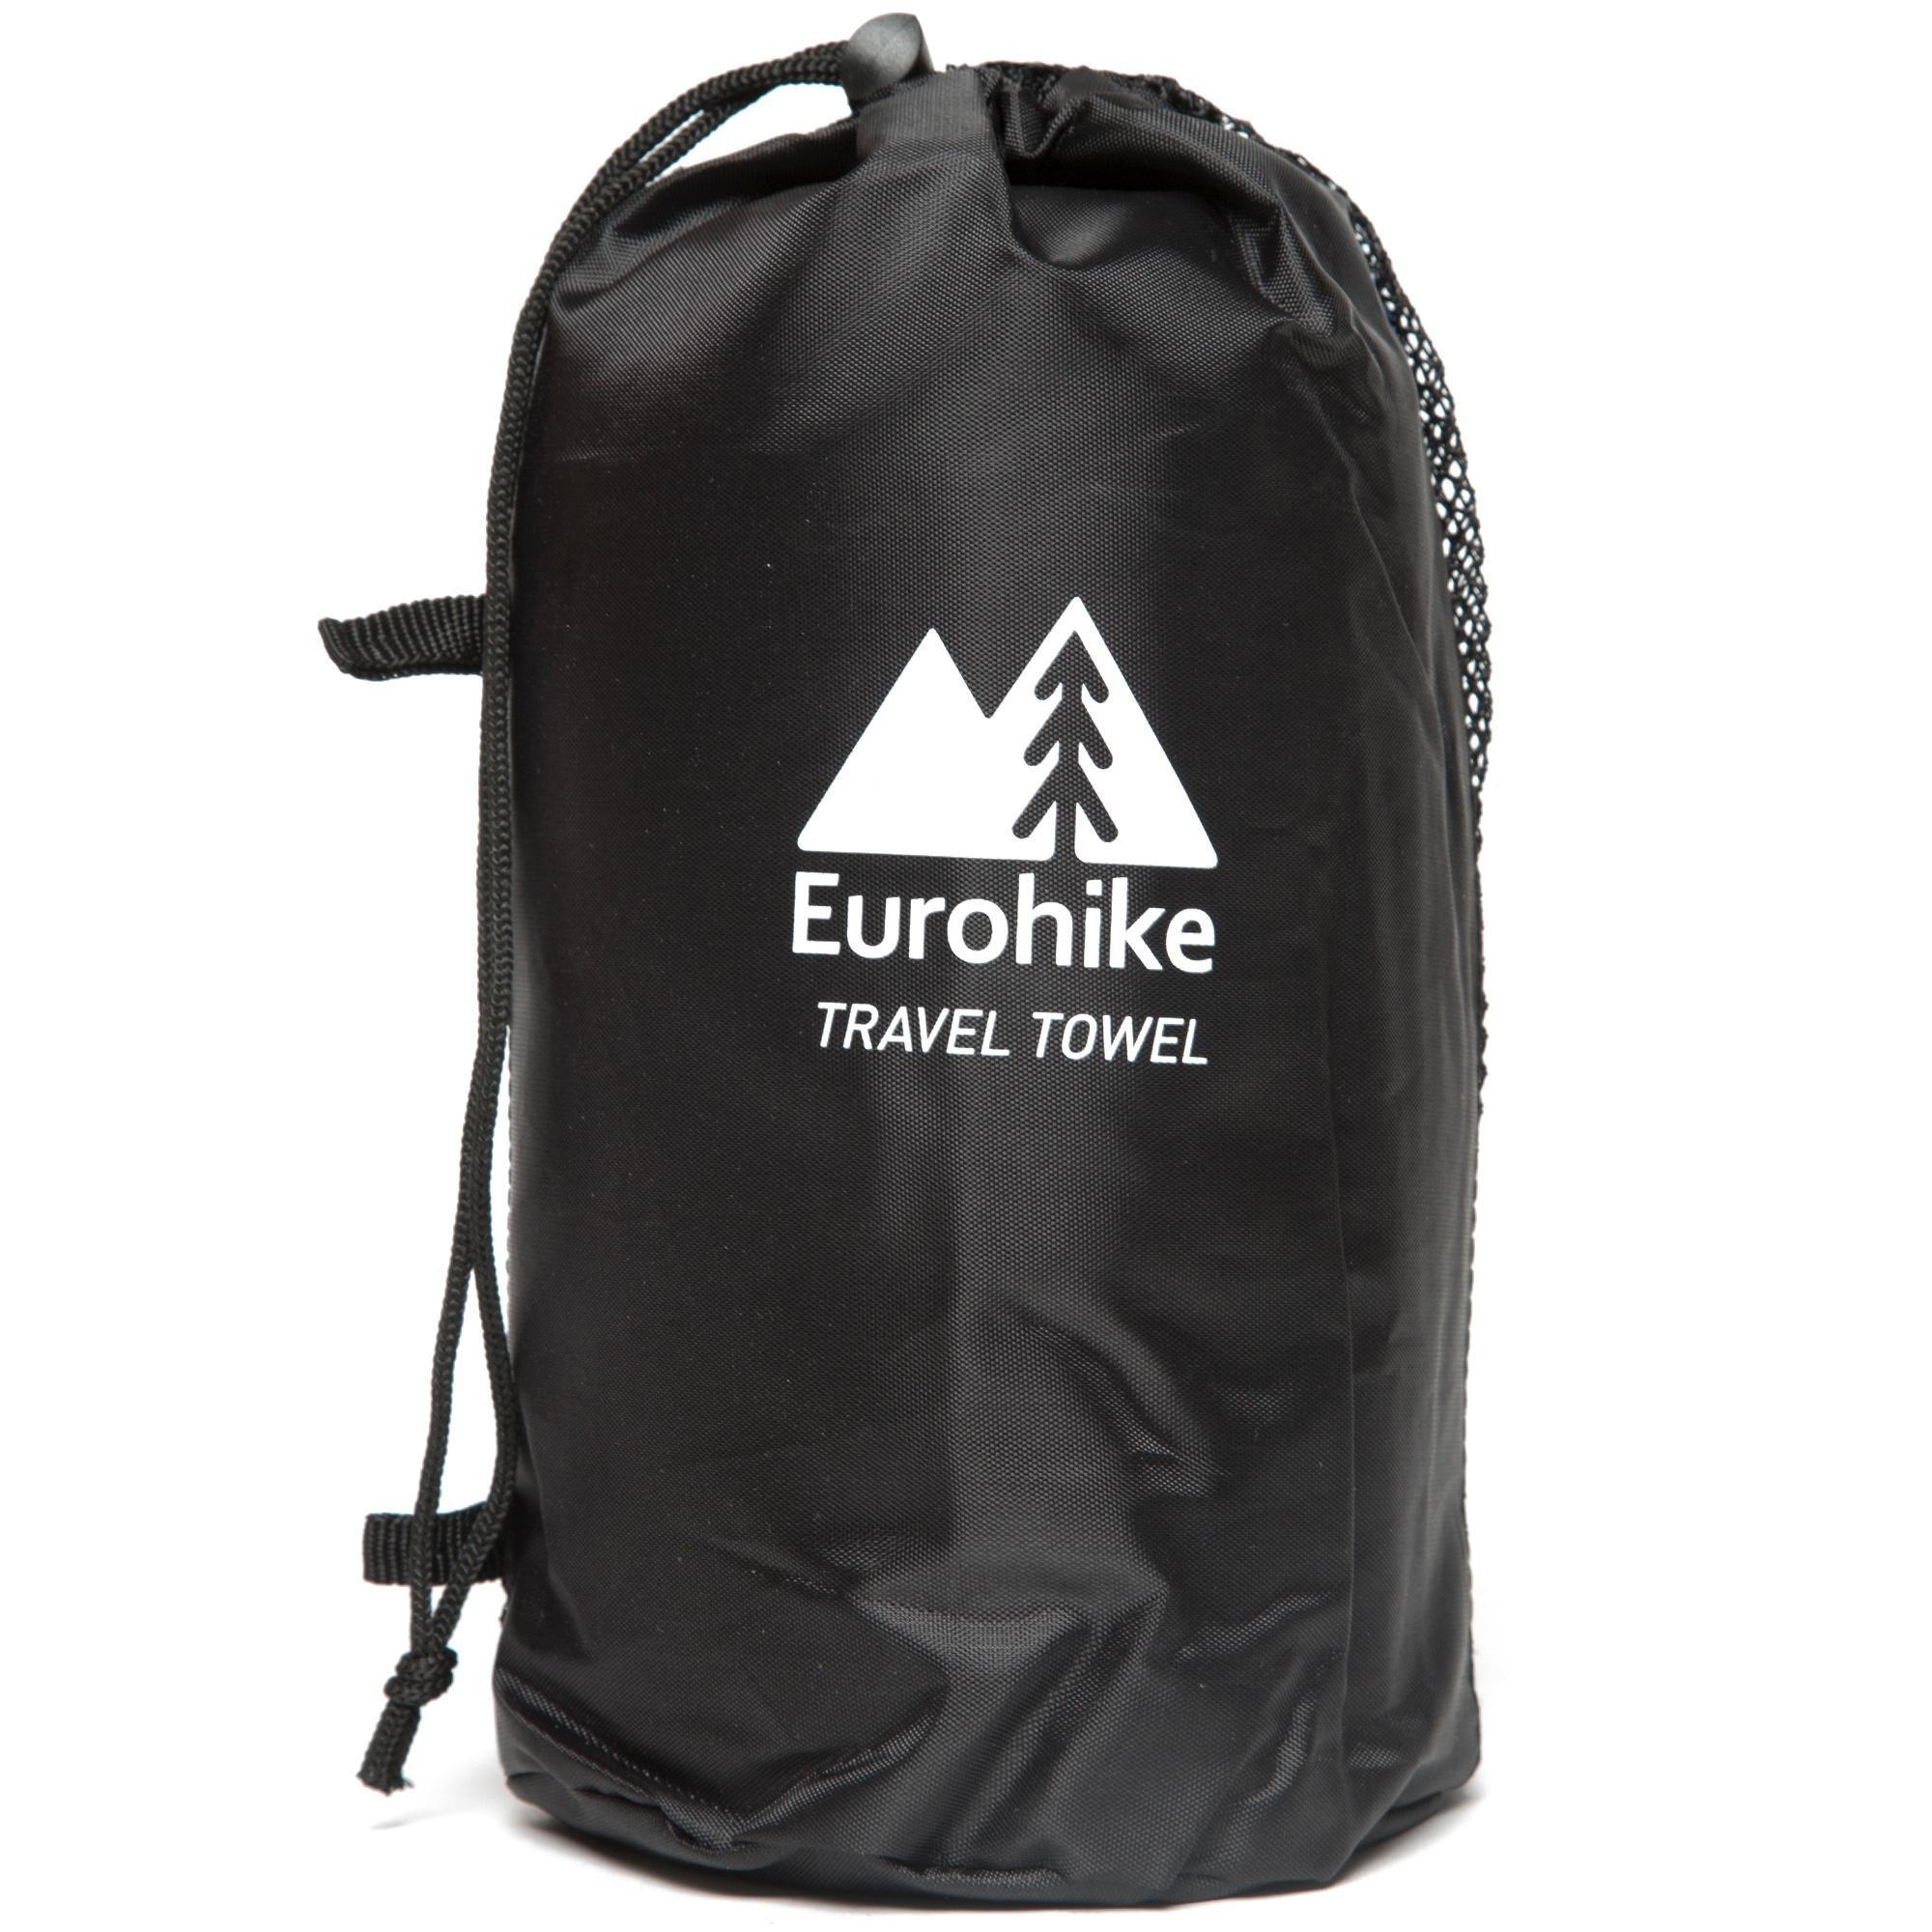 Eurohike Terry Microfibre Travel Towel - Small Review